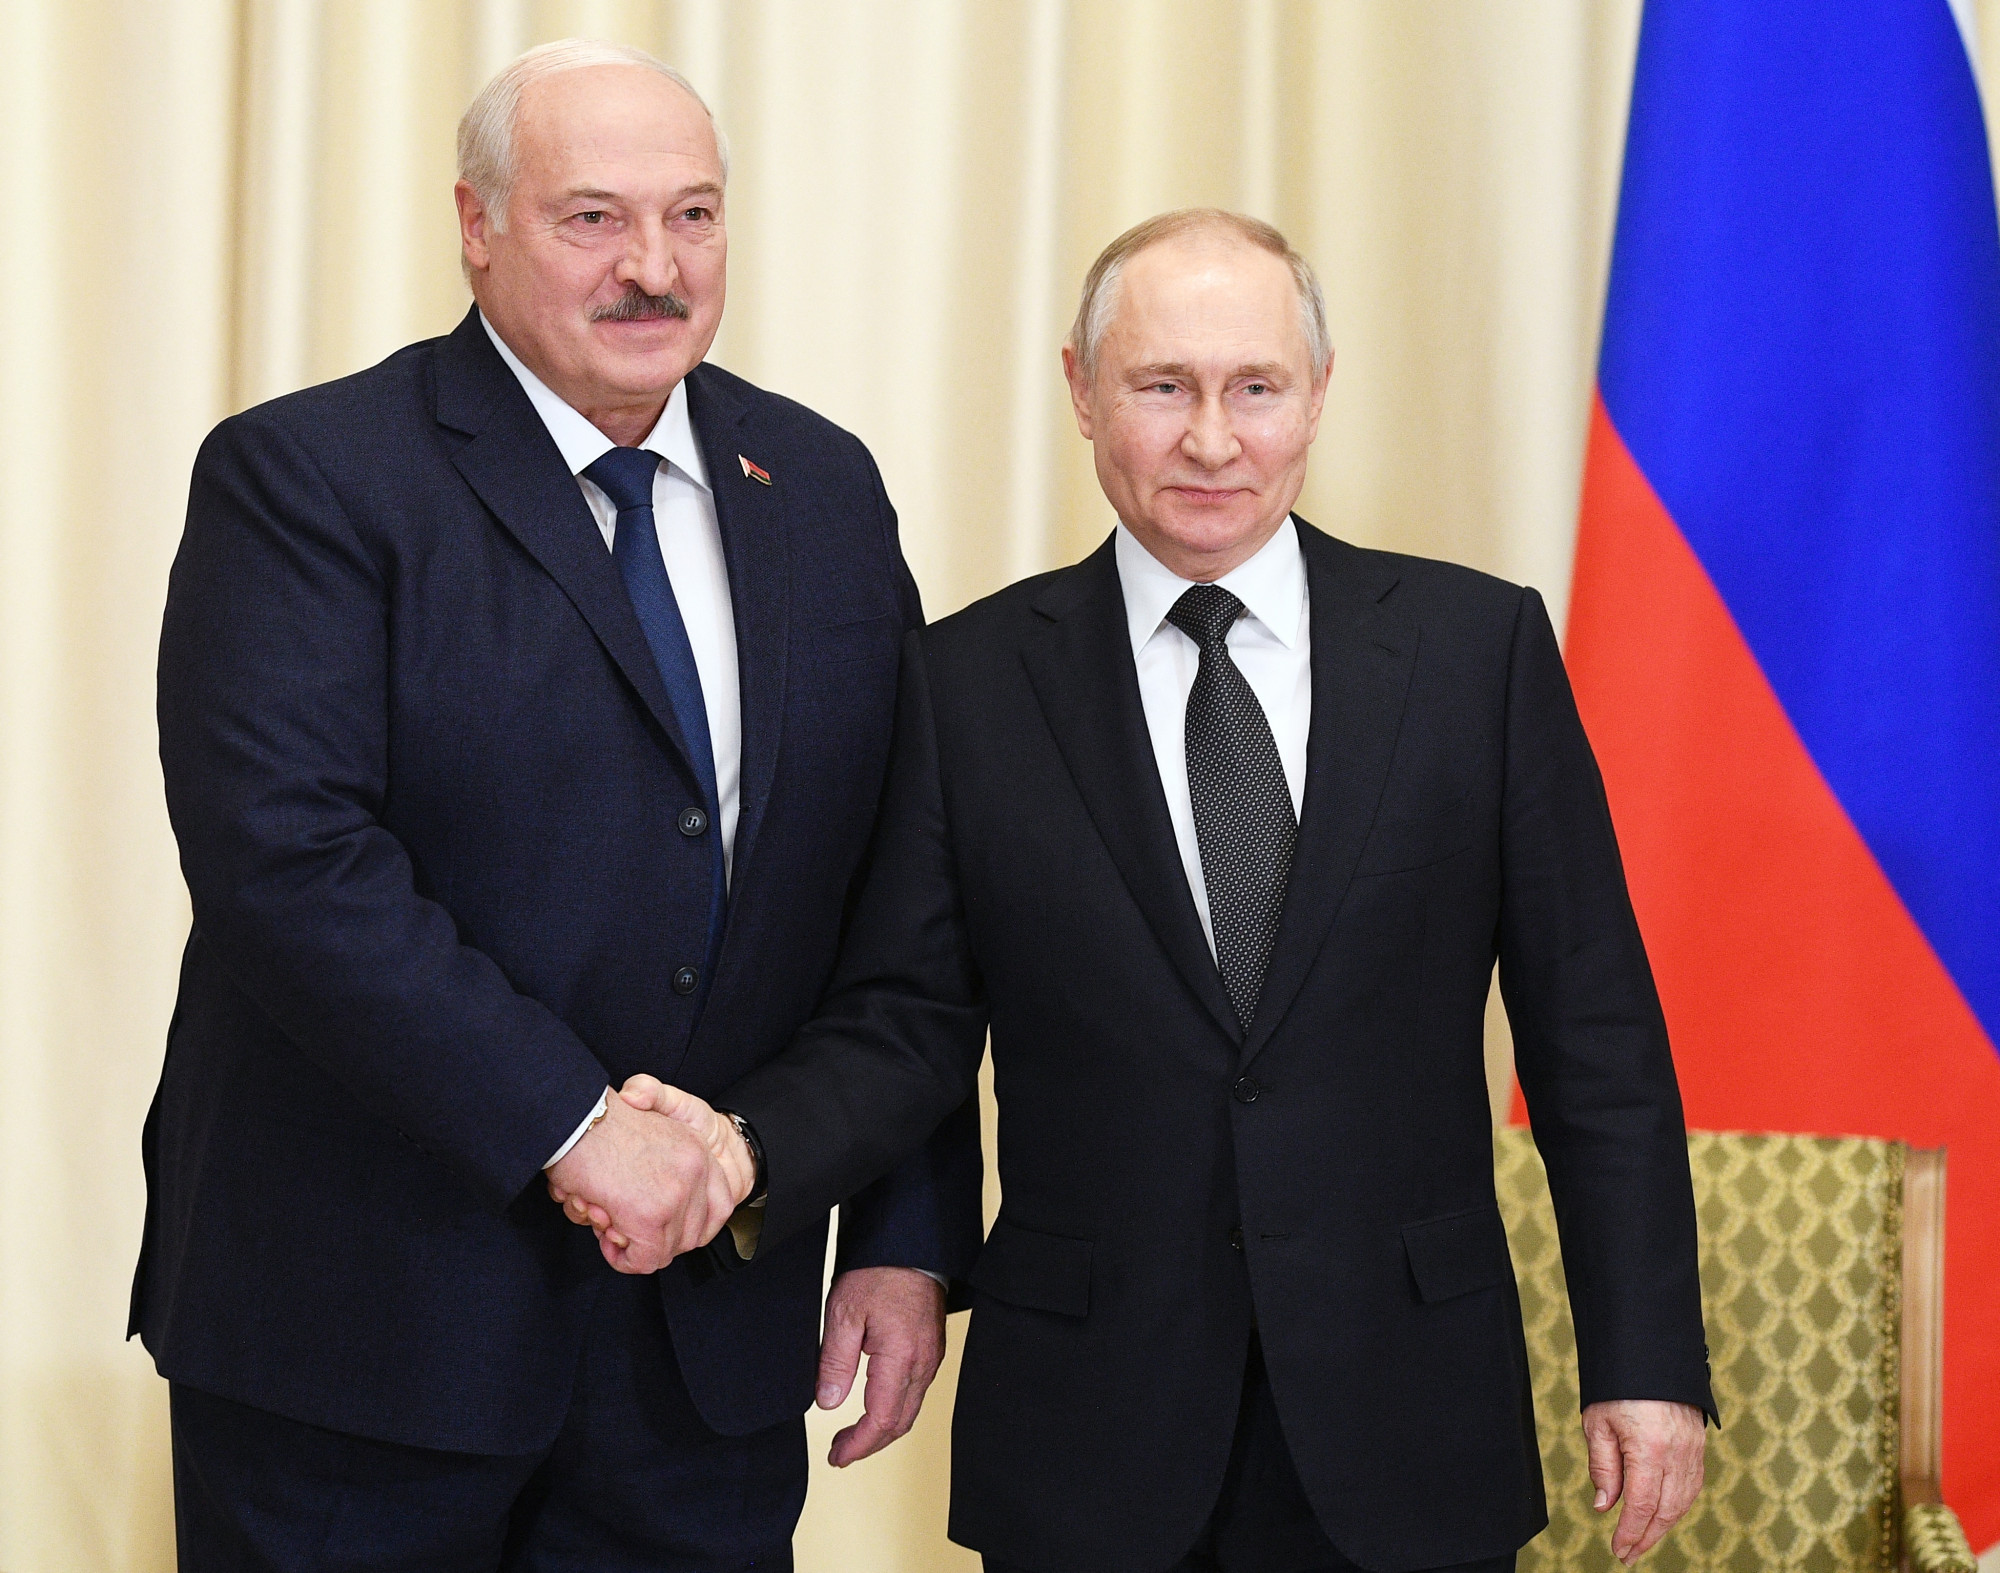 Lukashenko and Putin in Moscow on Friday